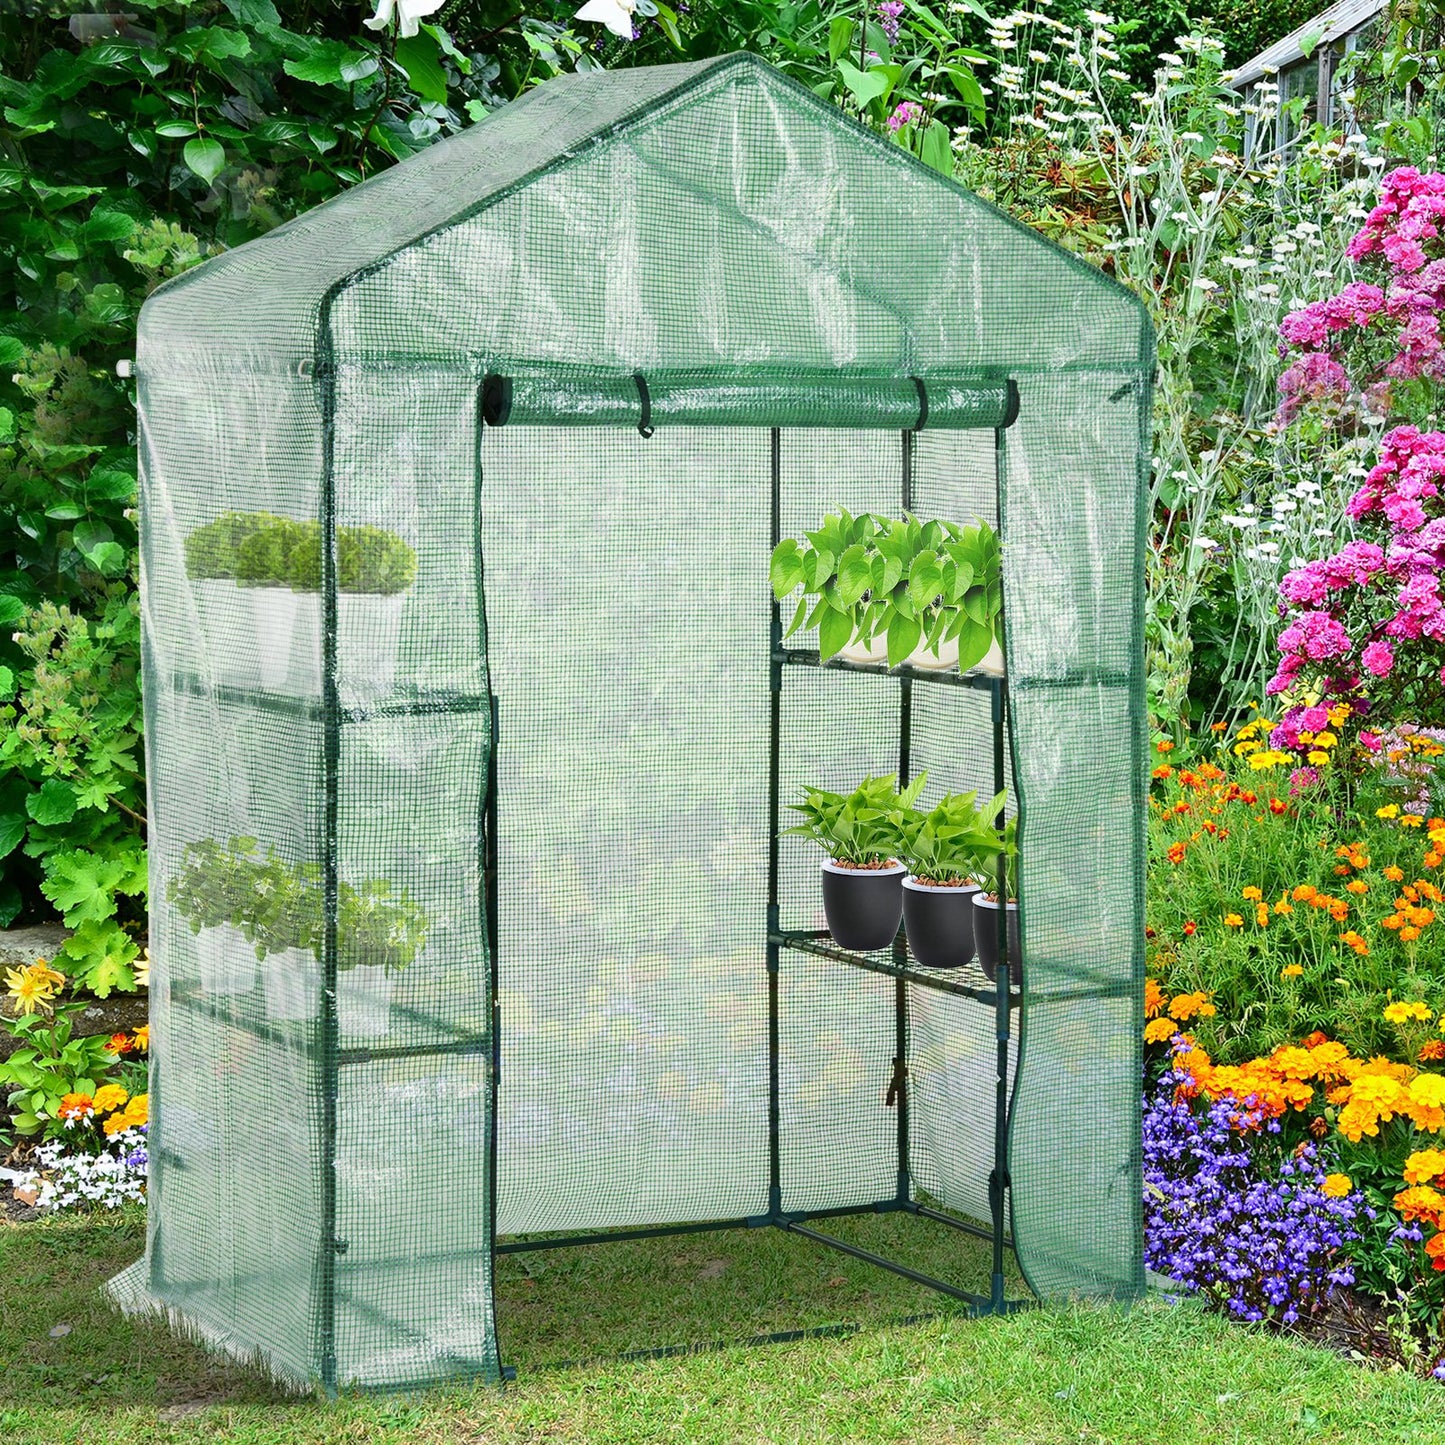 Outsunny Walk-in Plant Greenhouse Portable Garden Flower Seed Warm